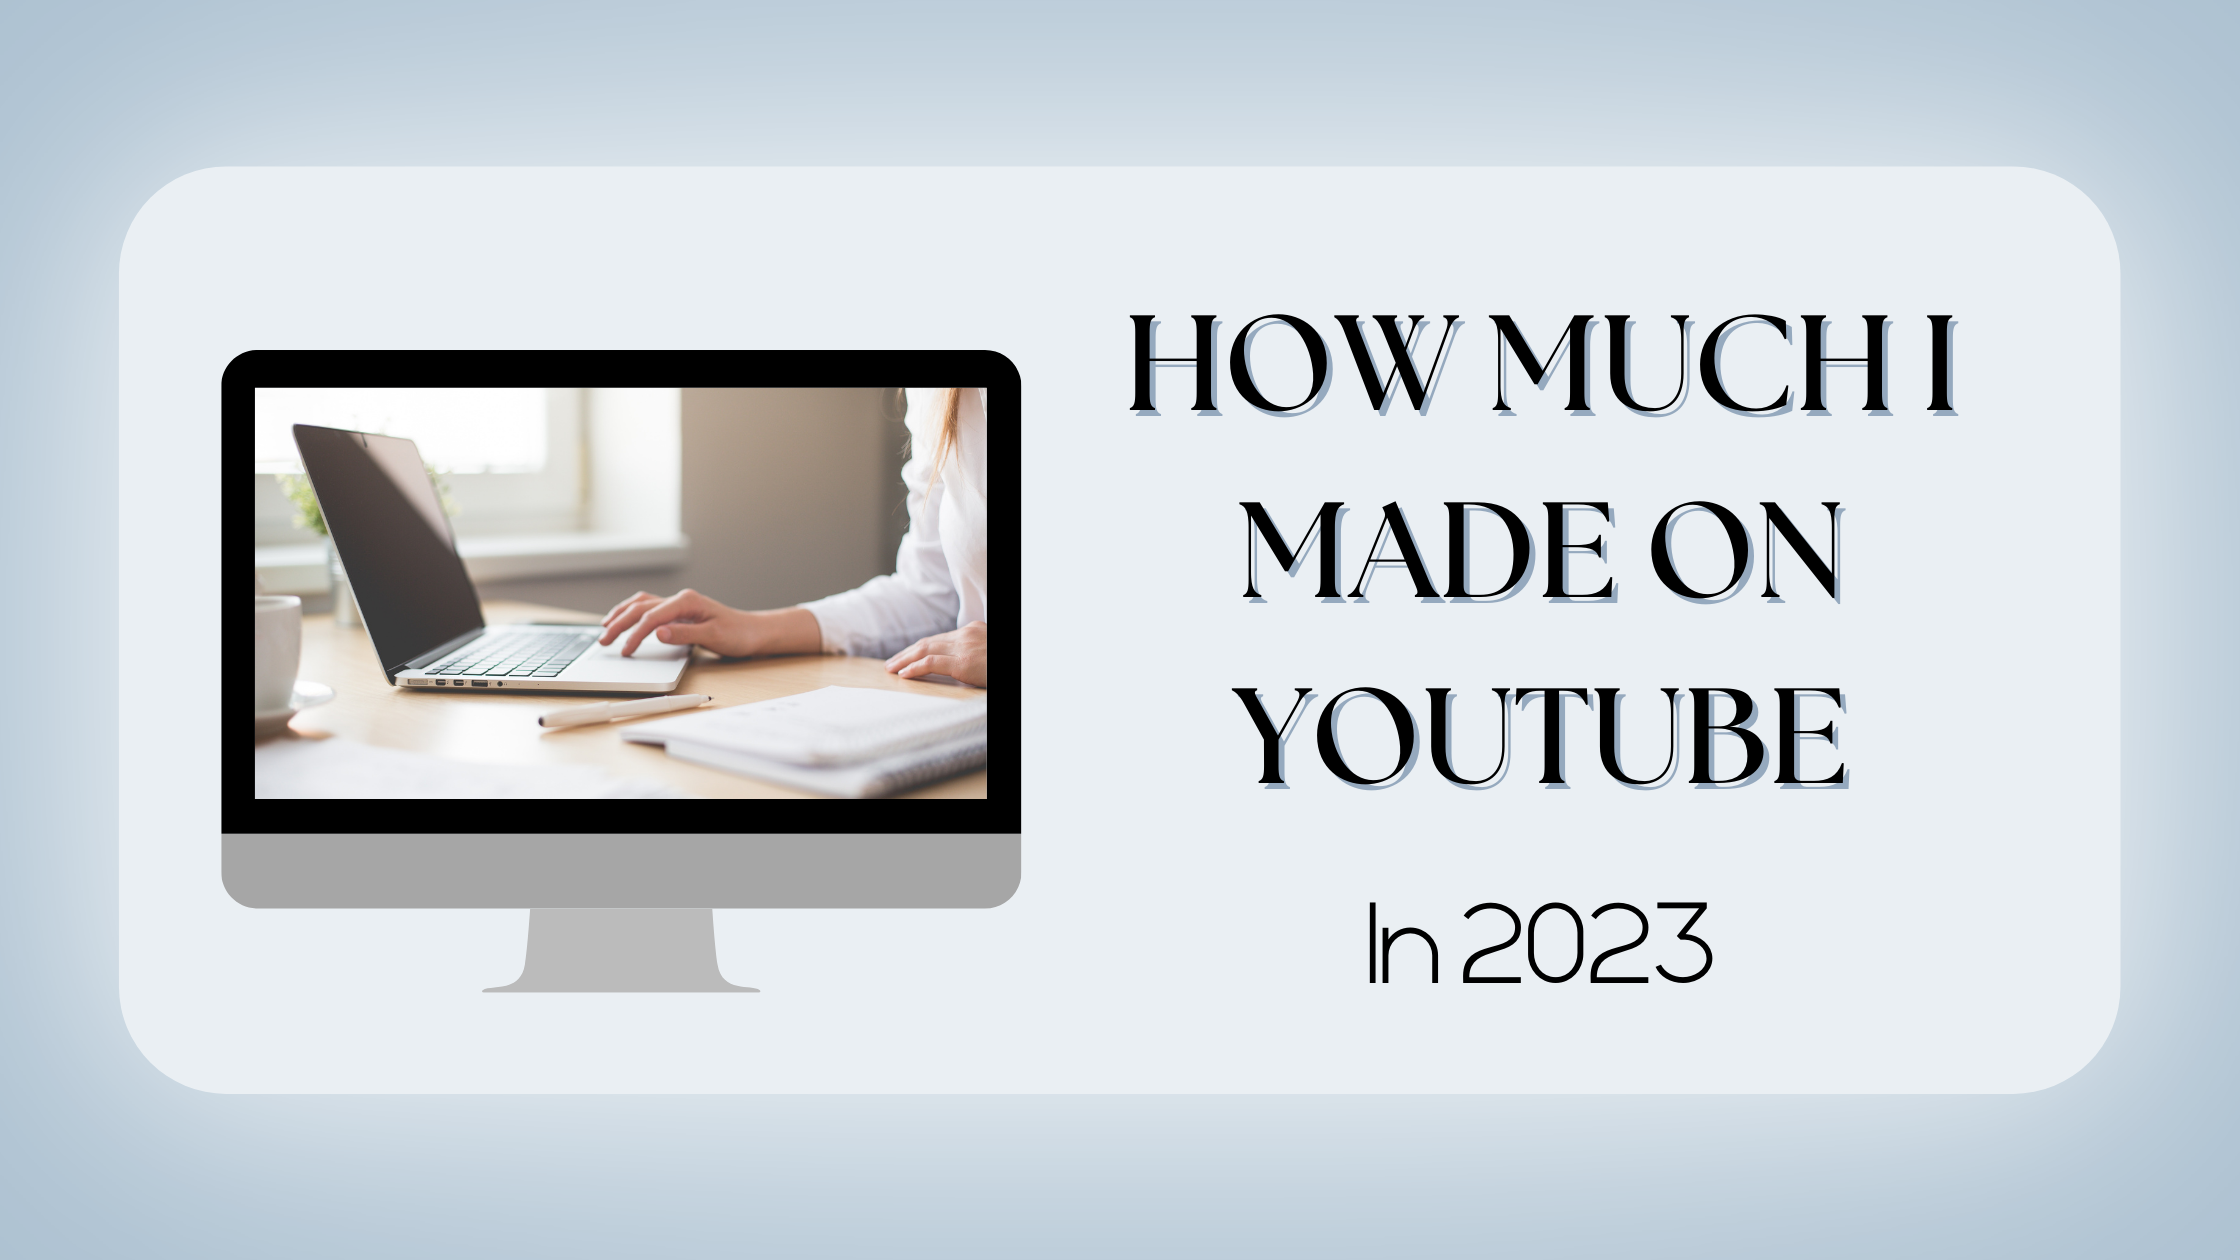 How Much I Made on YouTube in 2023